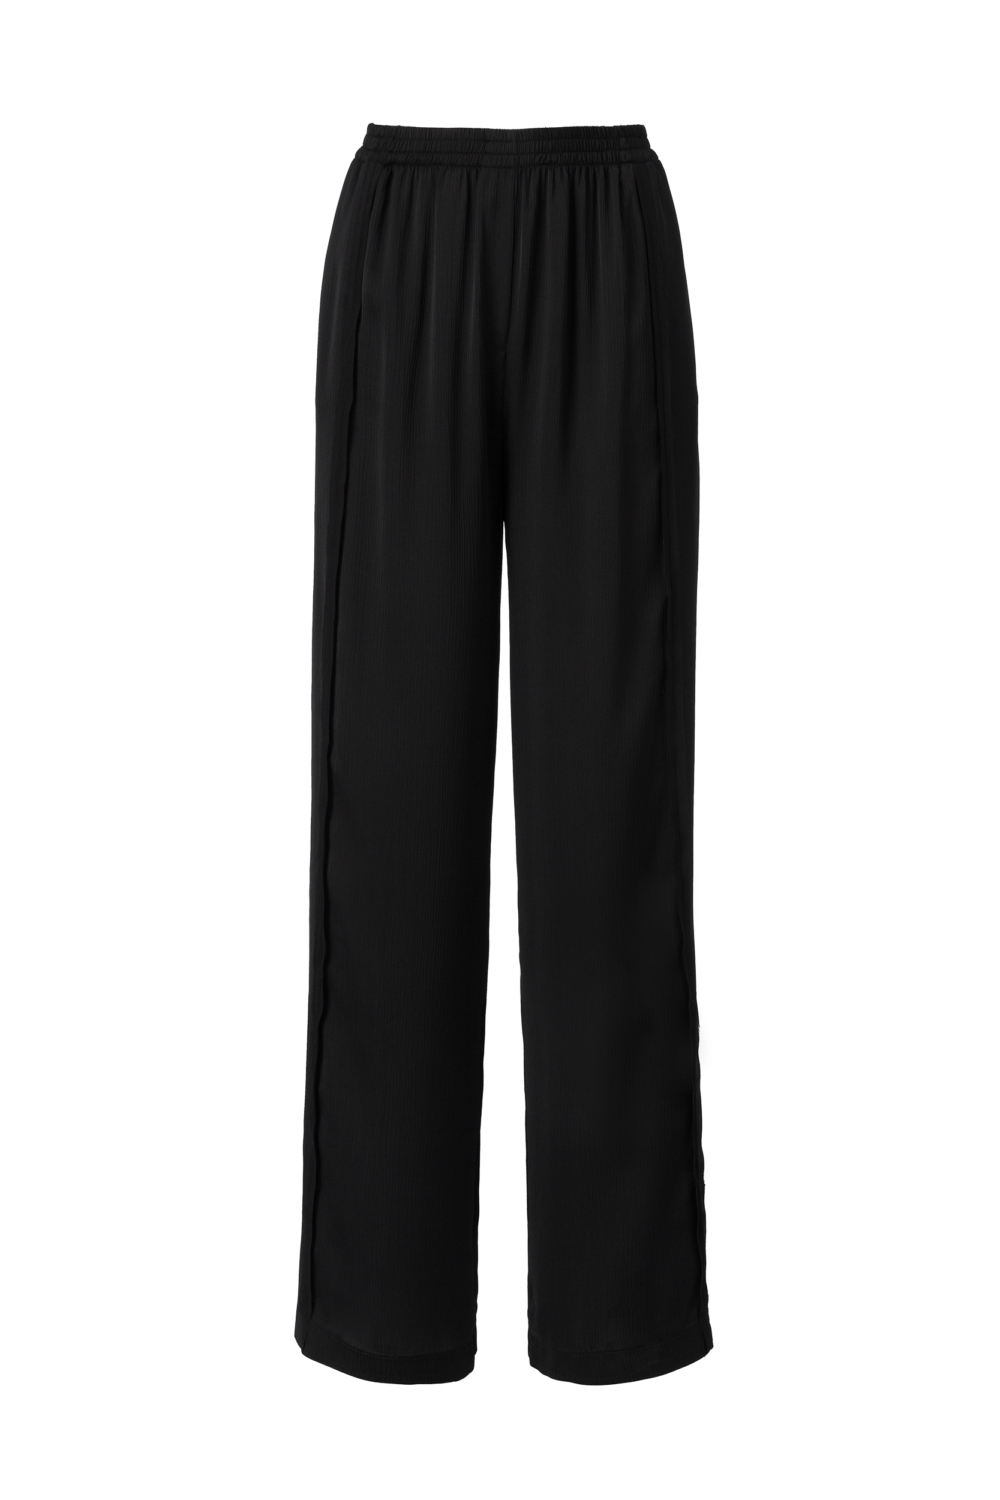 WIDE BLACK TROUSERS